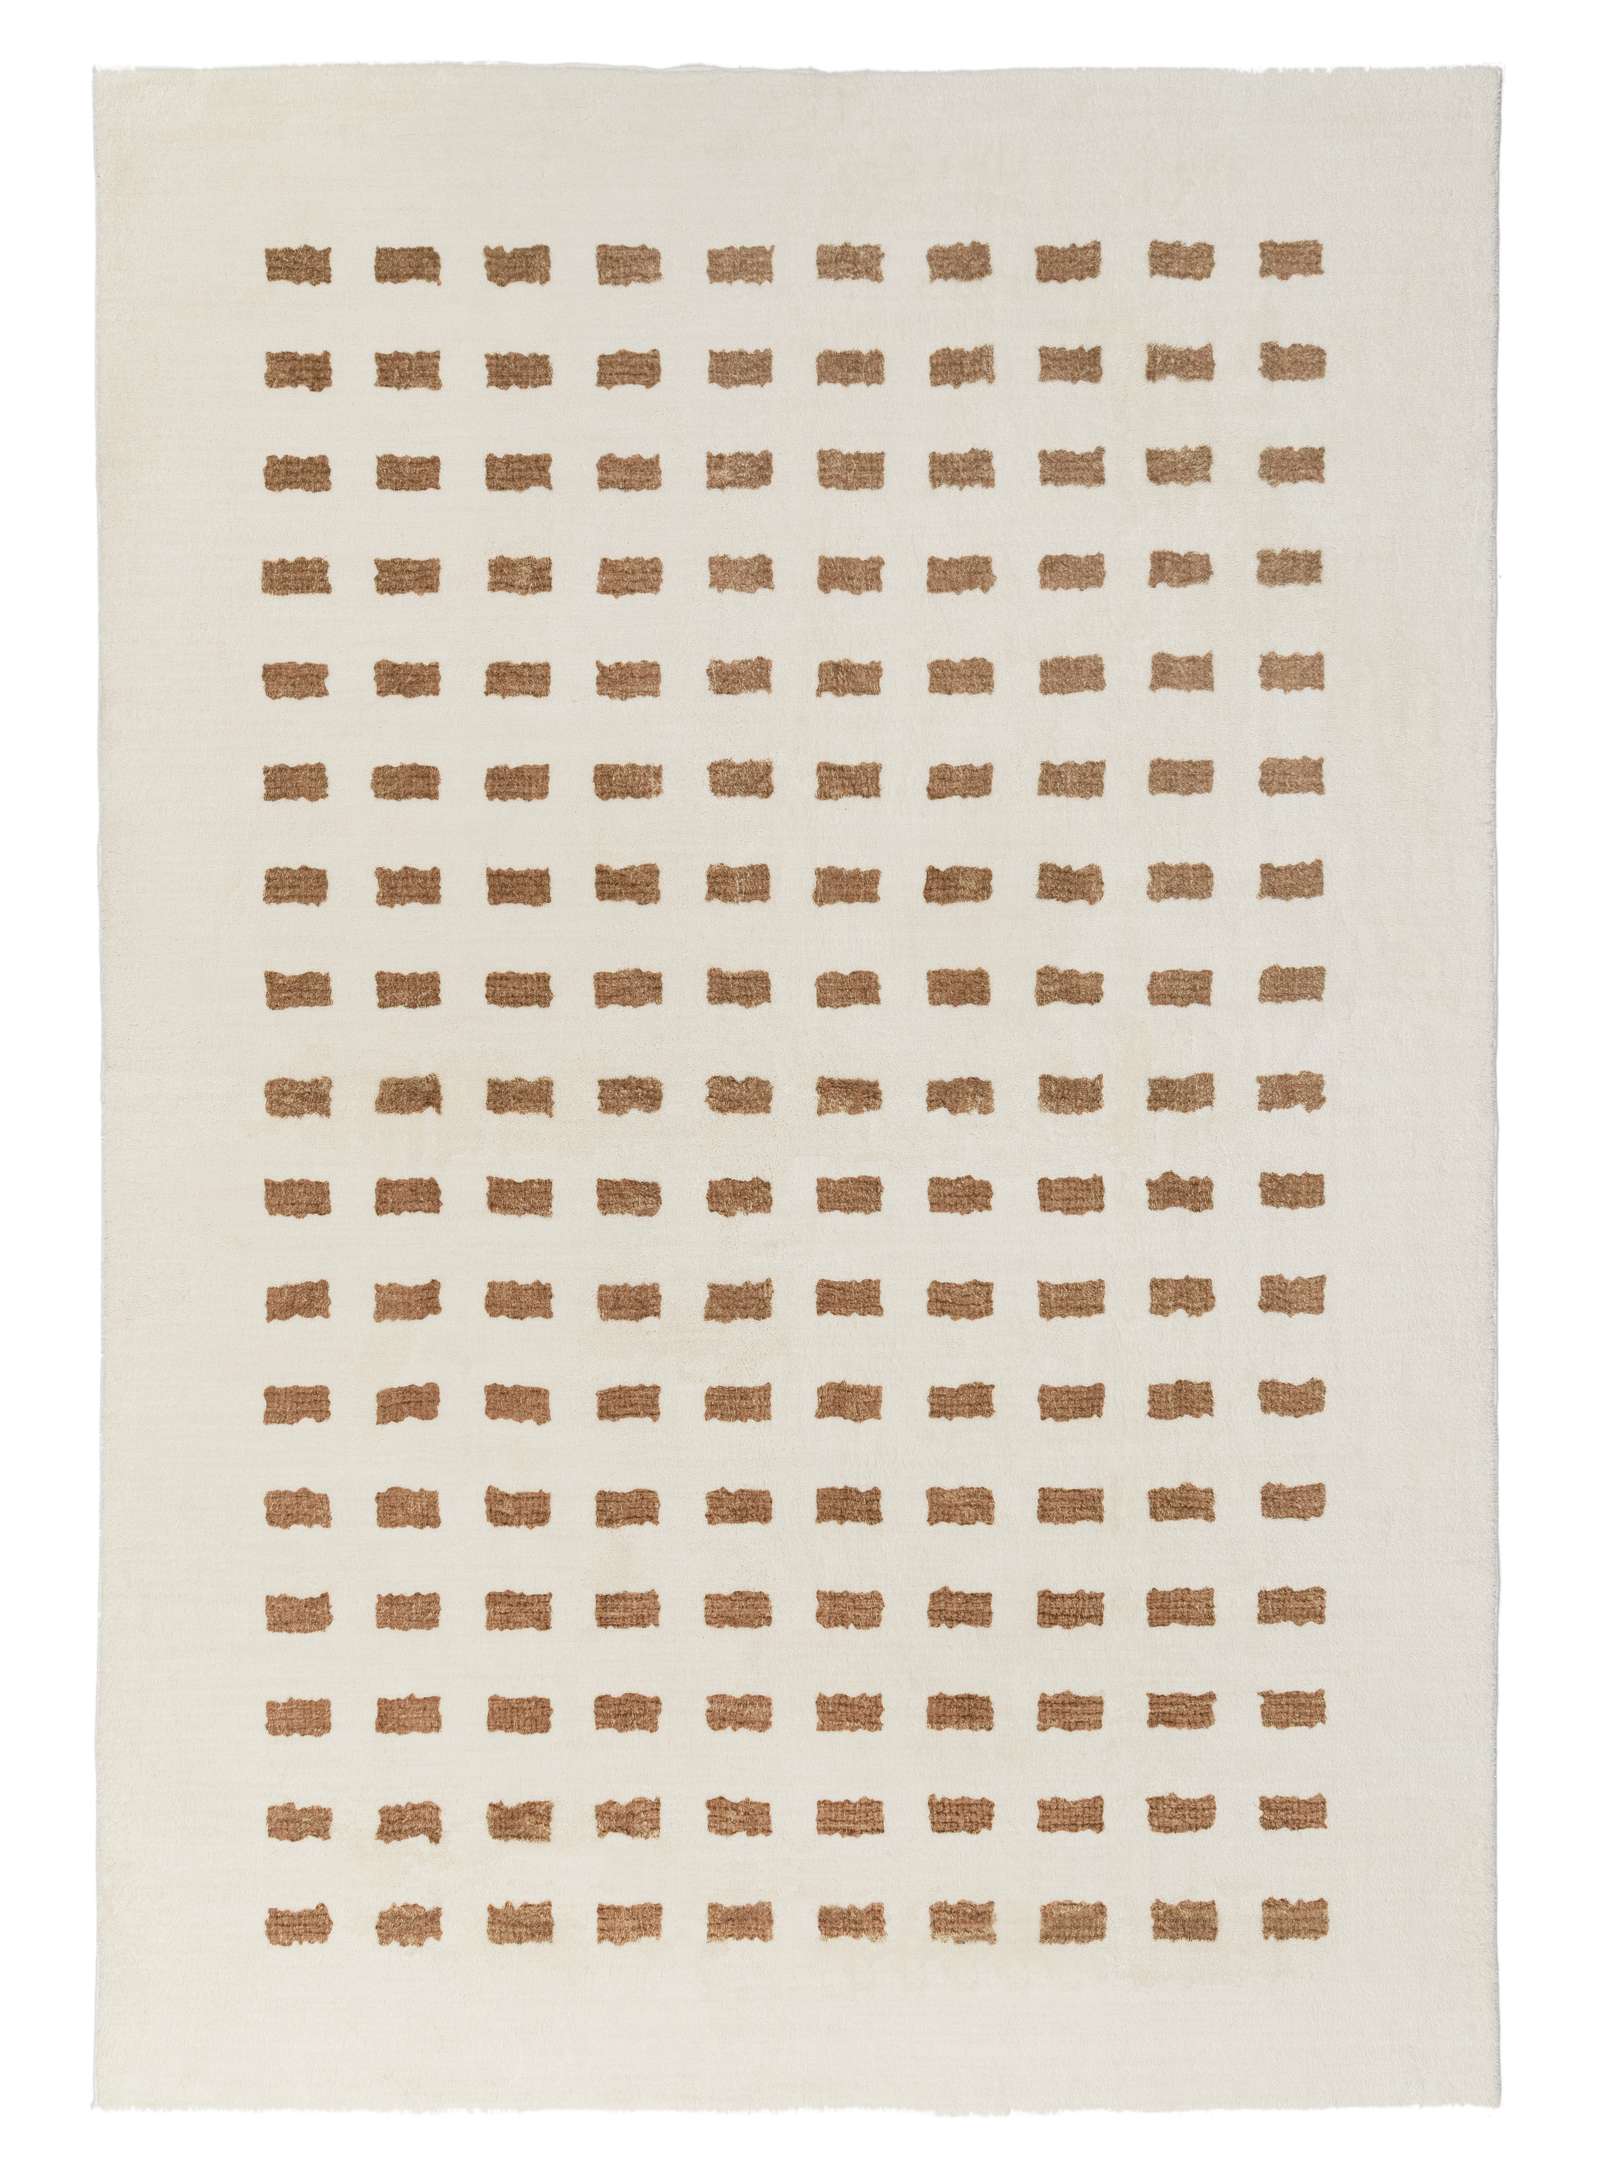 Loopsie RUGS 180cm x 120cm Balan Cream and Brown Rectangles Washable Rug